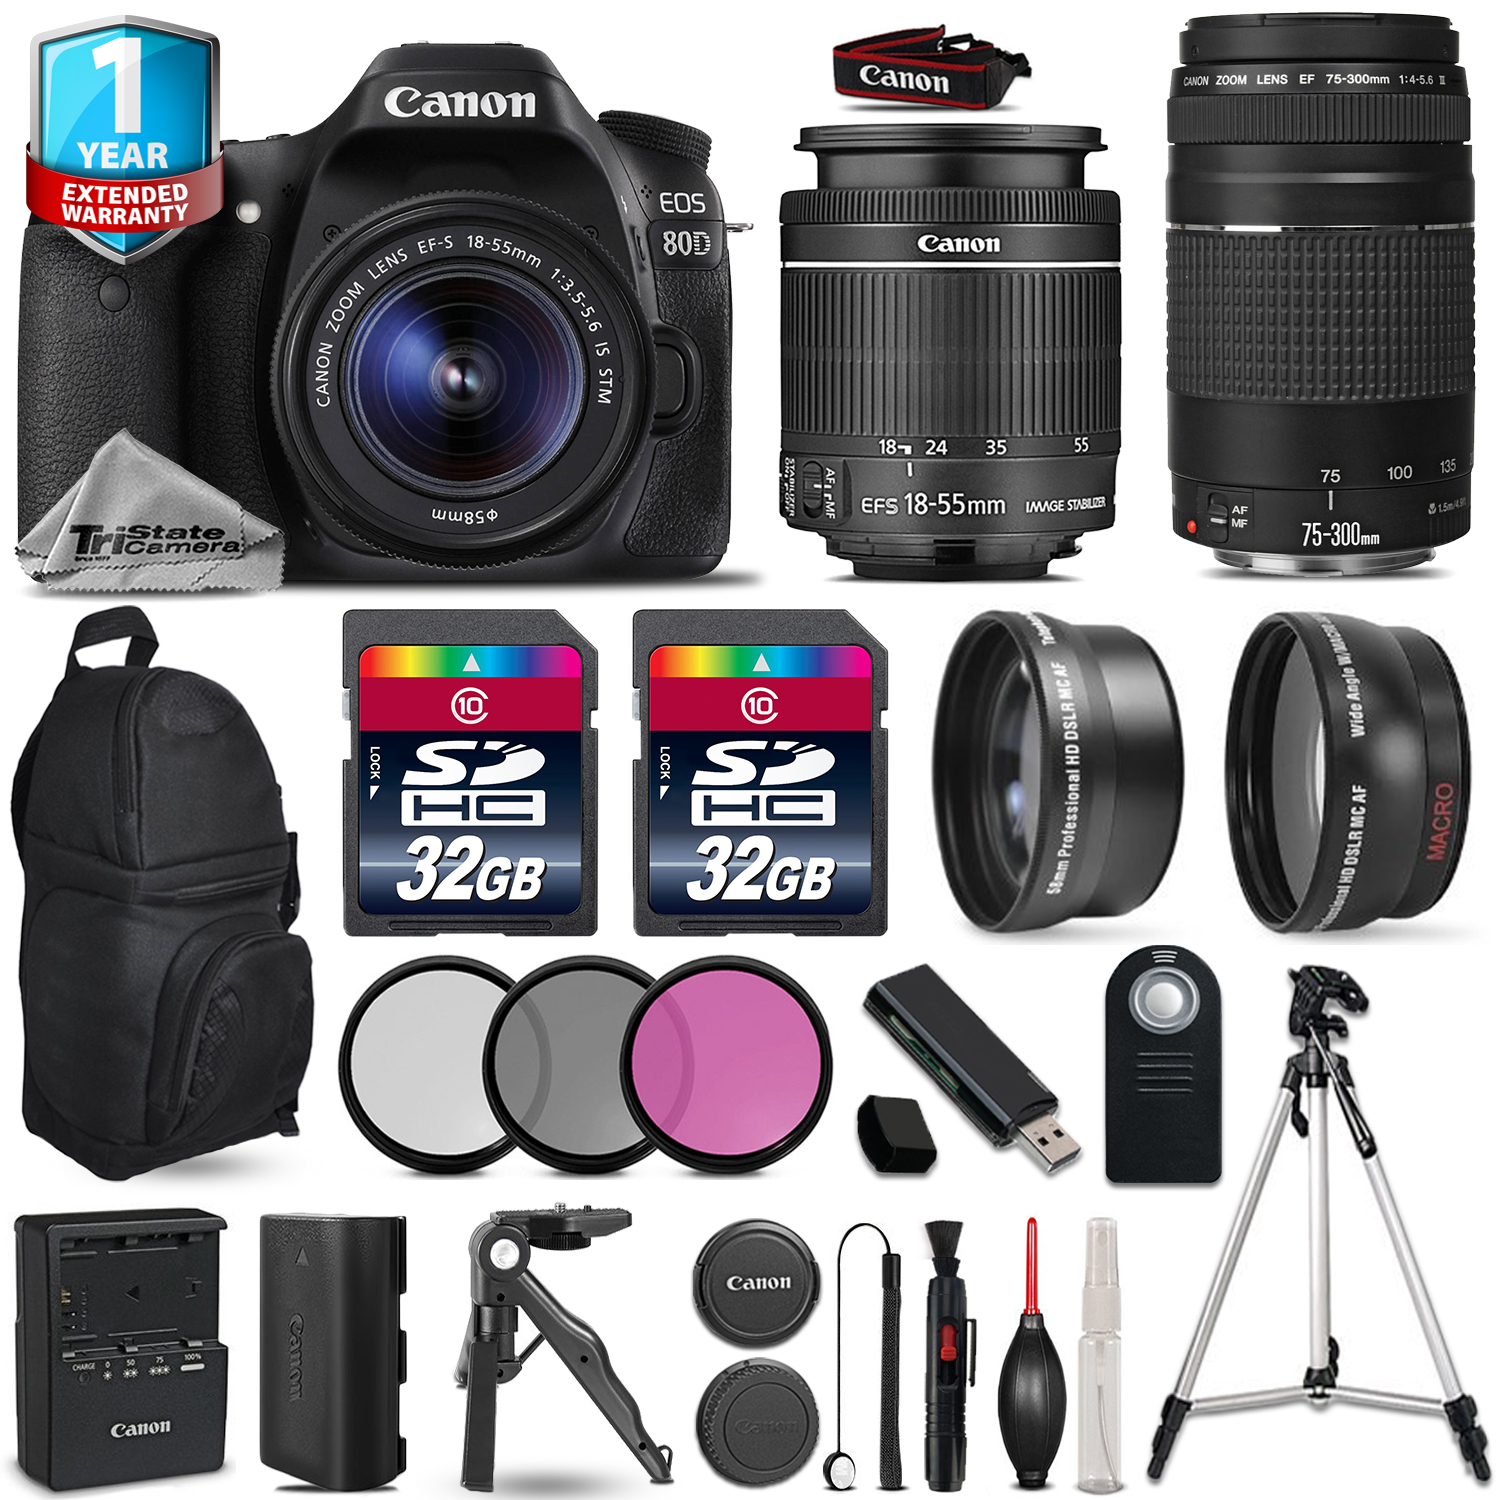 EOS 80D DSLR Camera + 18-55mm IS + 75-300mm III + 3PC Filter +1yr Warranty *FREE SHIPPING*